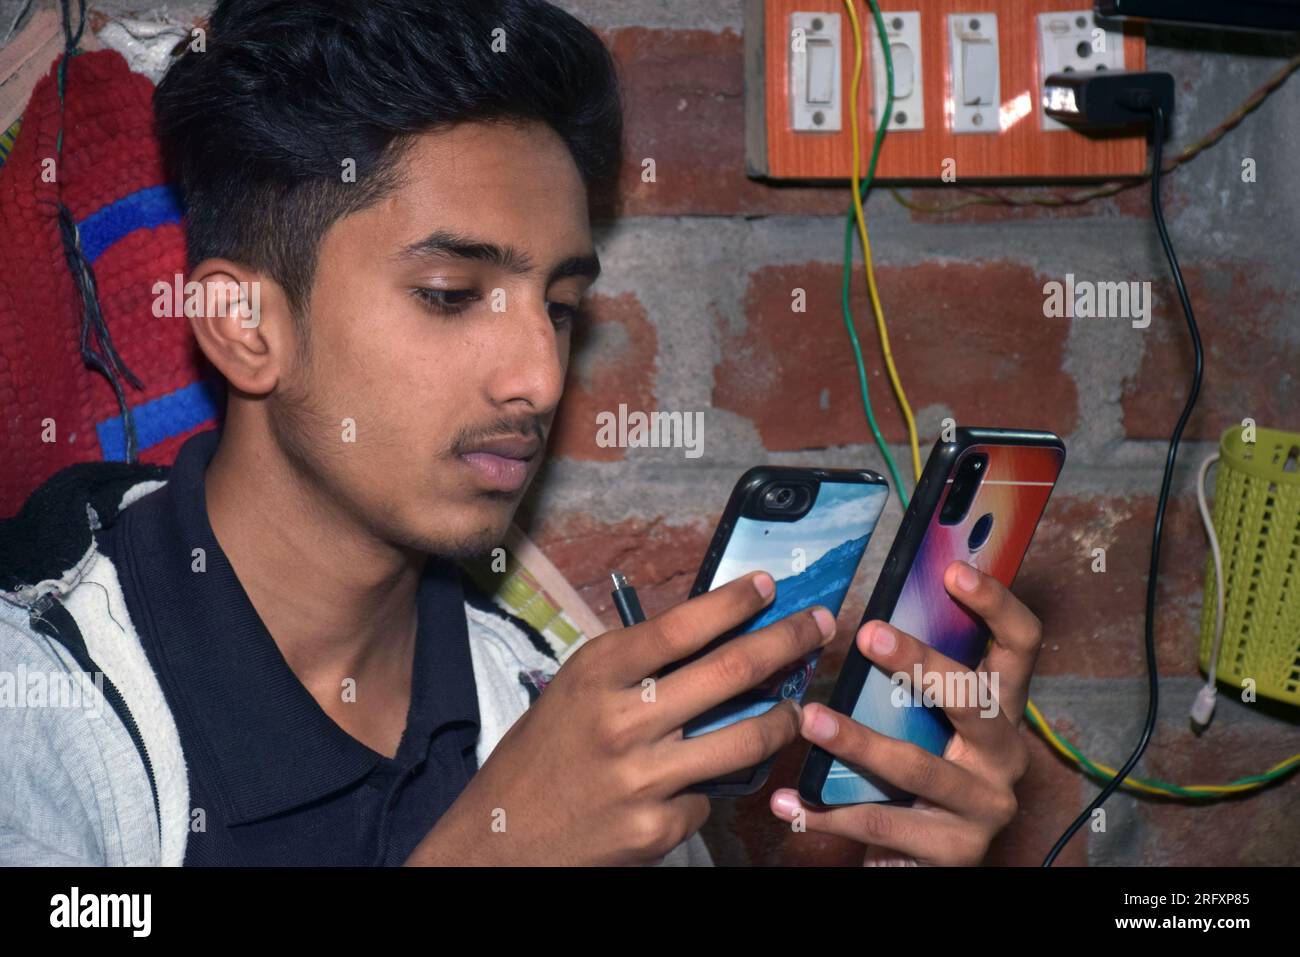 Indian teen using two mobiles simultaneously at home. brick wall and electric board background. Stock Photo